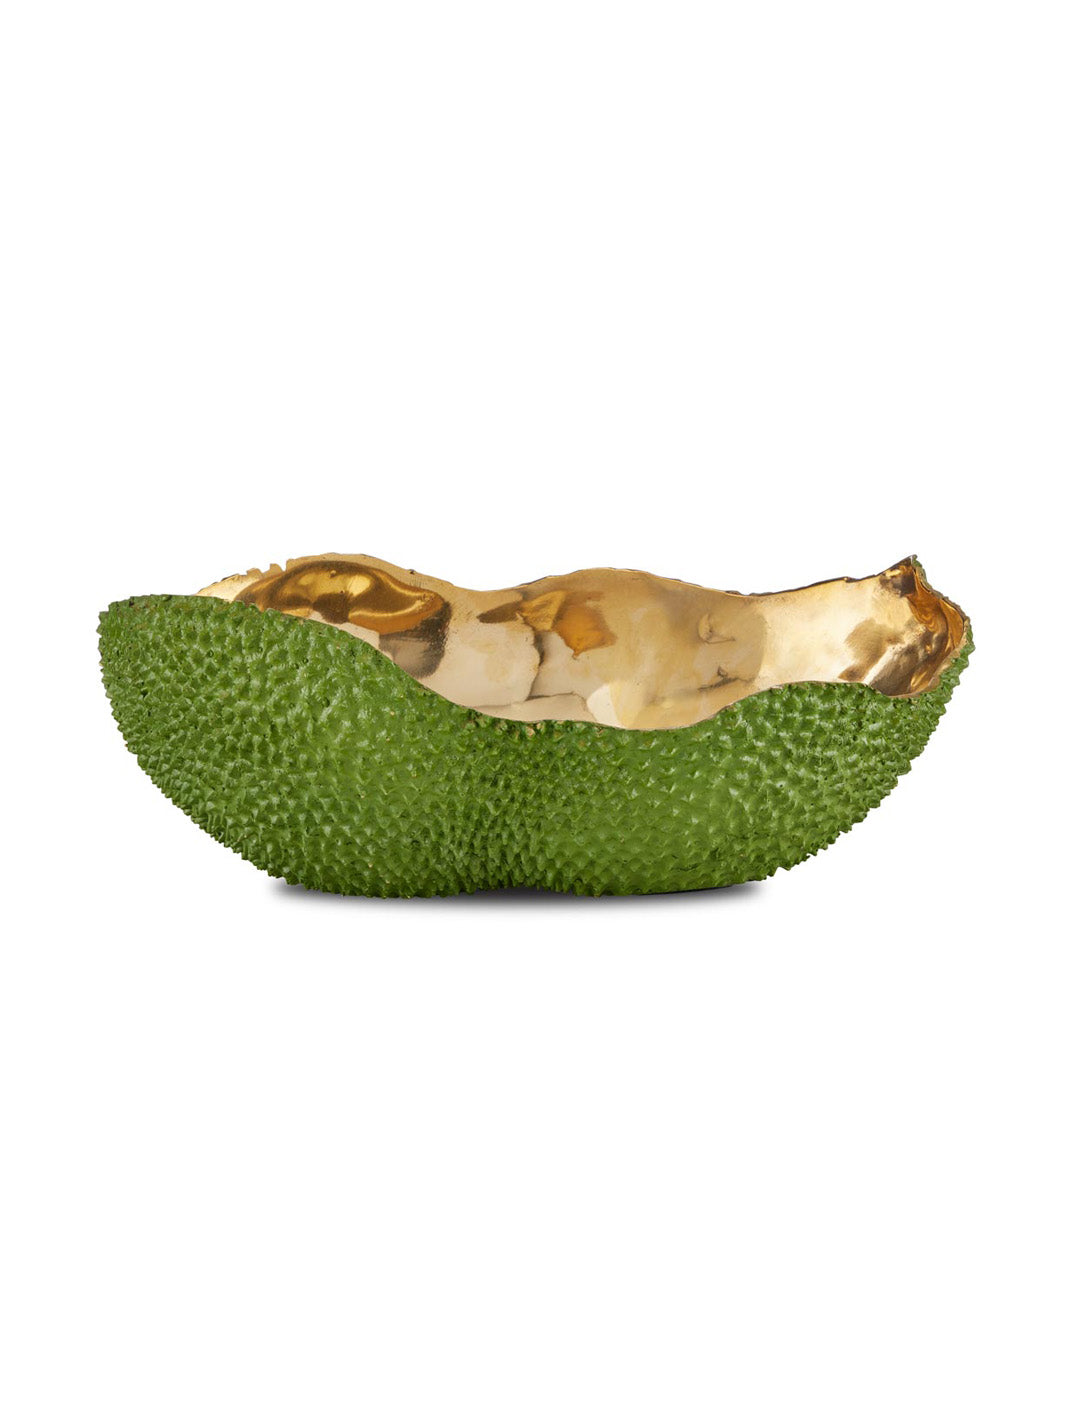 Jackfruit Green Oval Bowl by Currey & Company | Luxury Decor | Willow & Albert Home